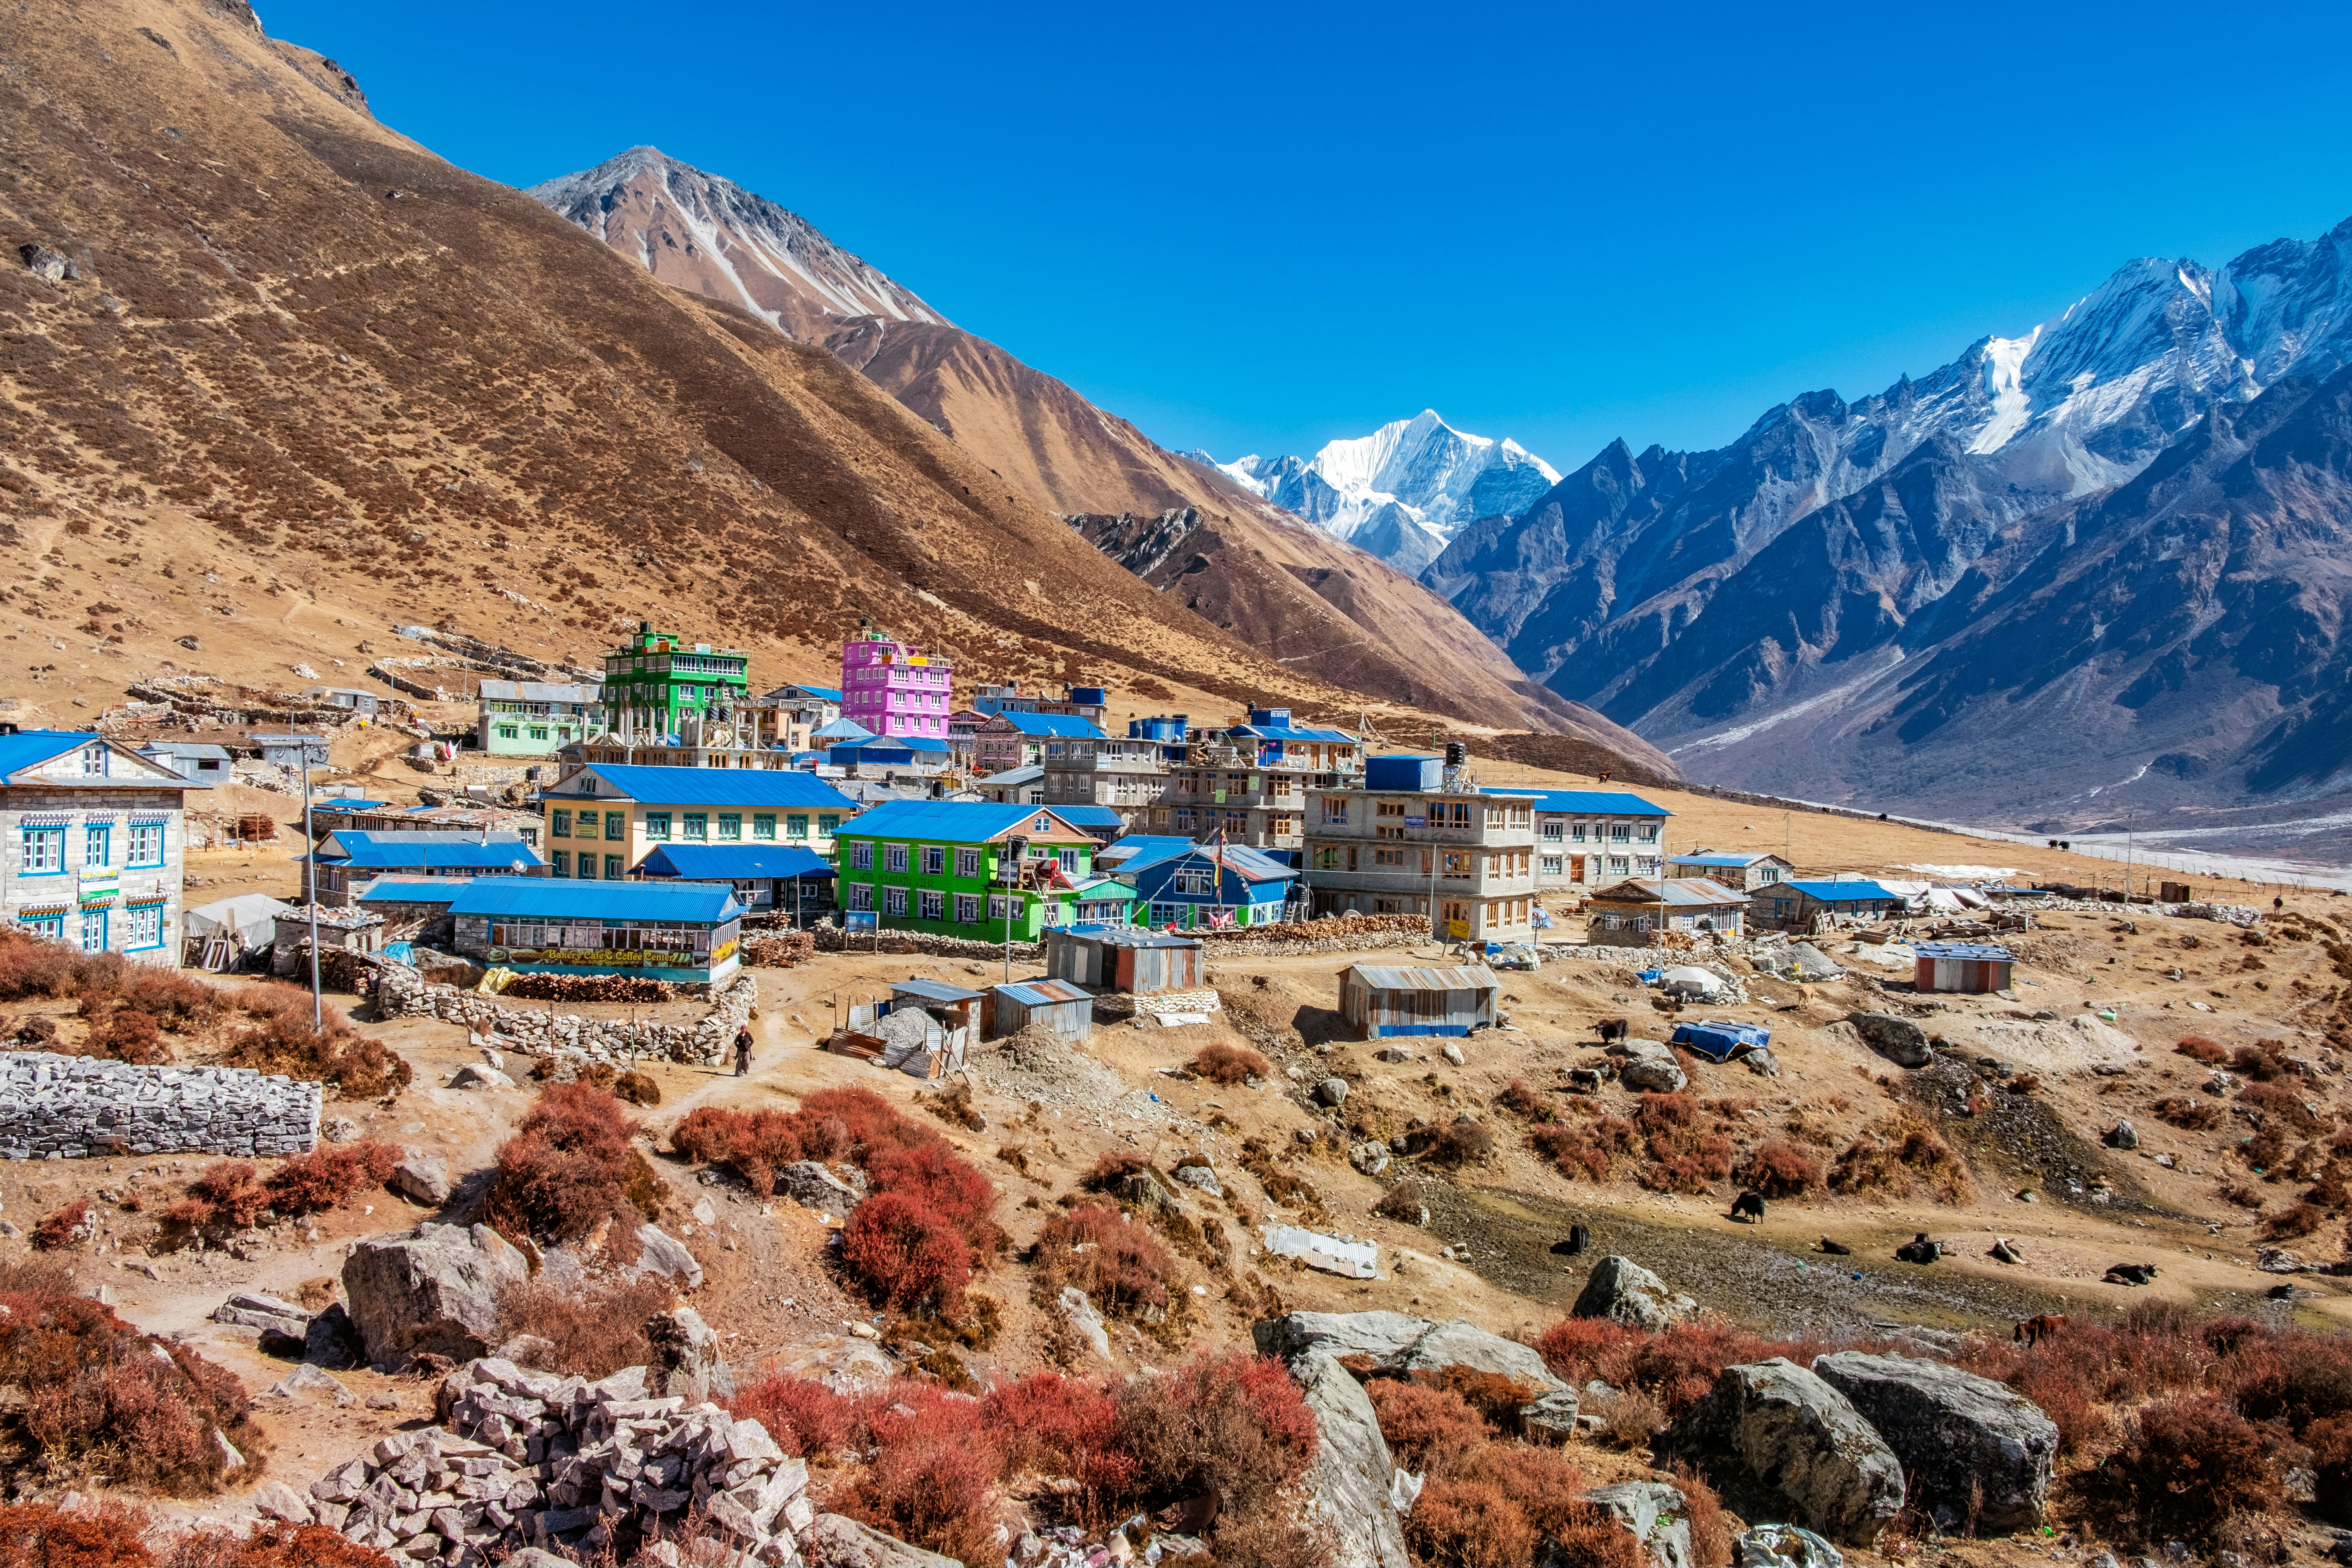 A village with bright blue roofs sits in a valley surrounded by high mountain peaks